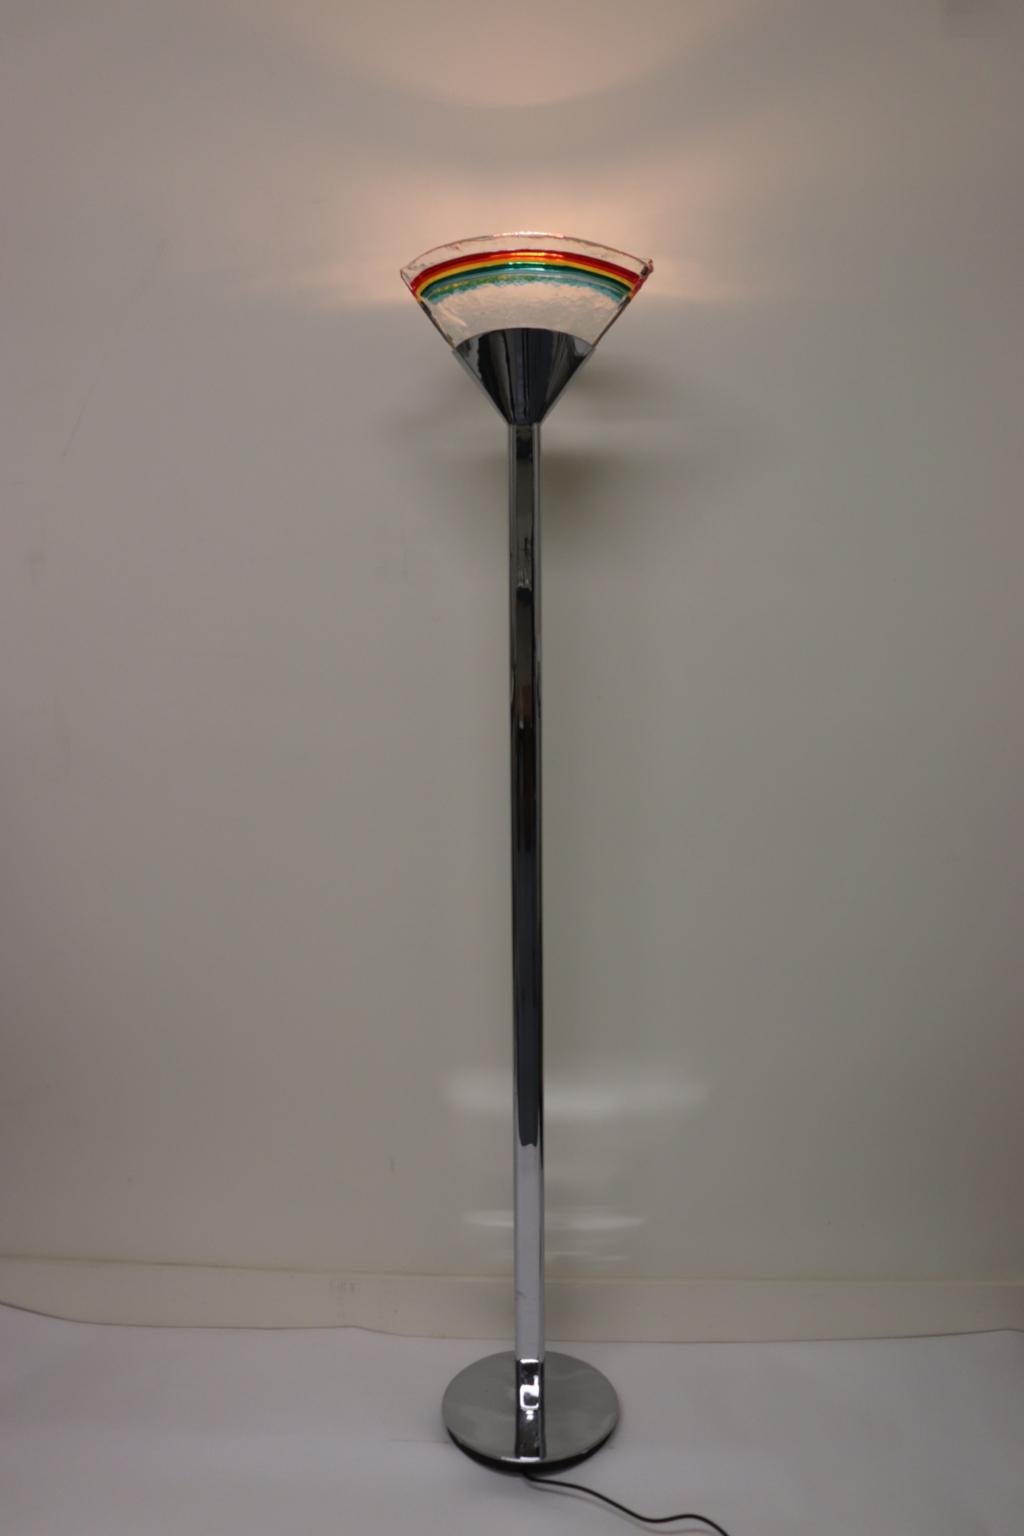 Italian floor lamp Murano hand cast curved clear glass with rainbow colors. Mounting: polished chrome metal.
The 